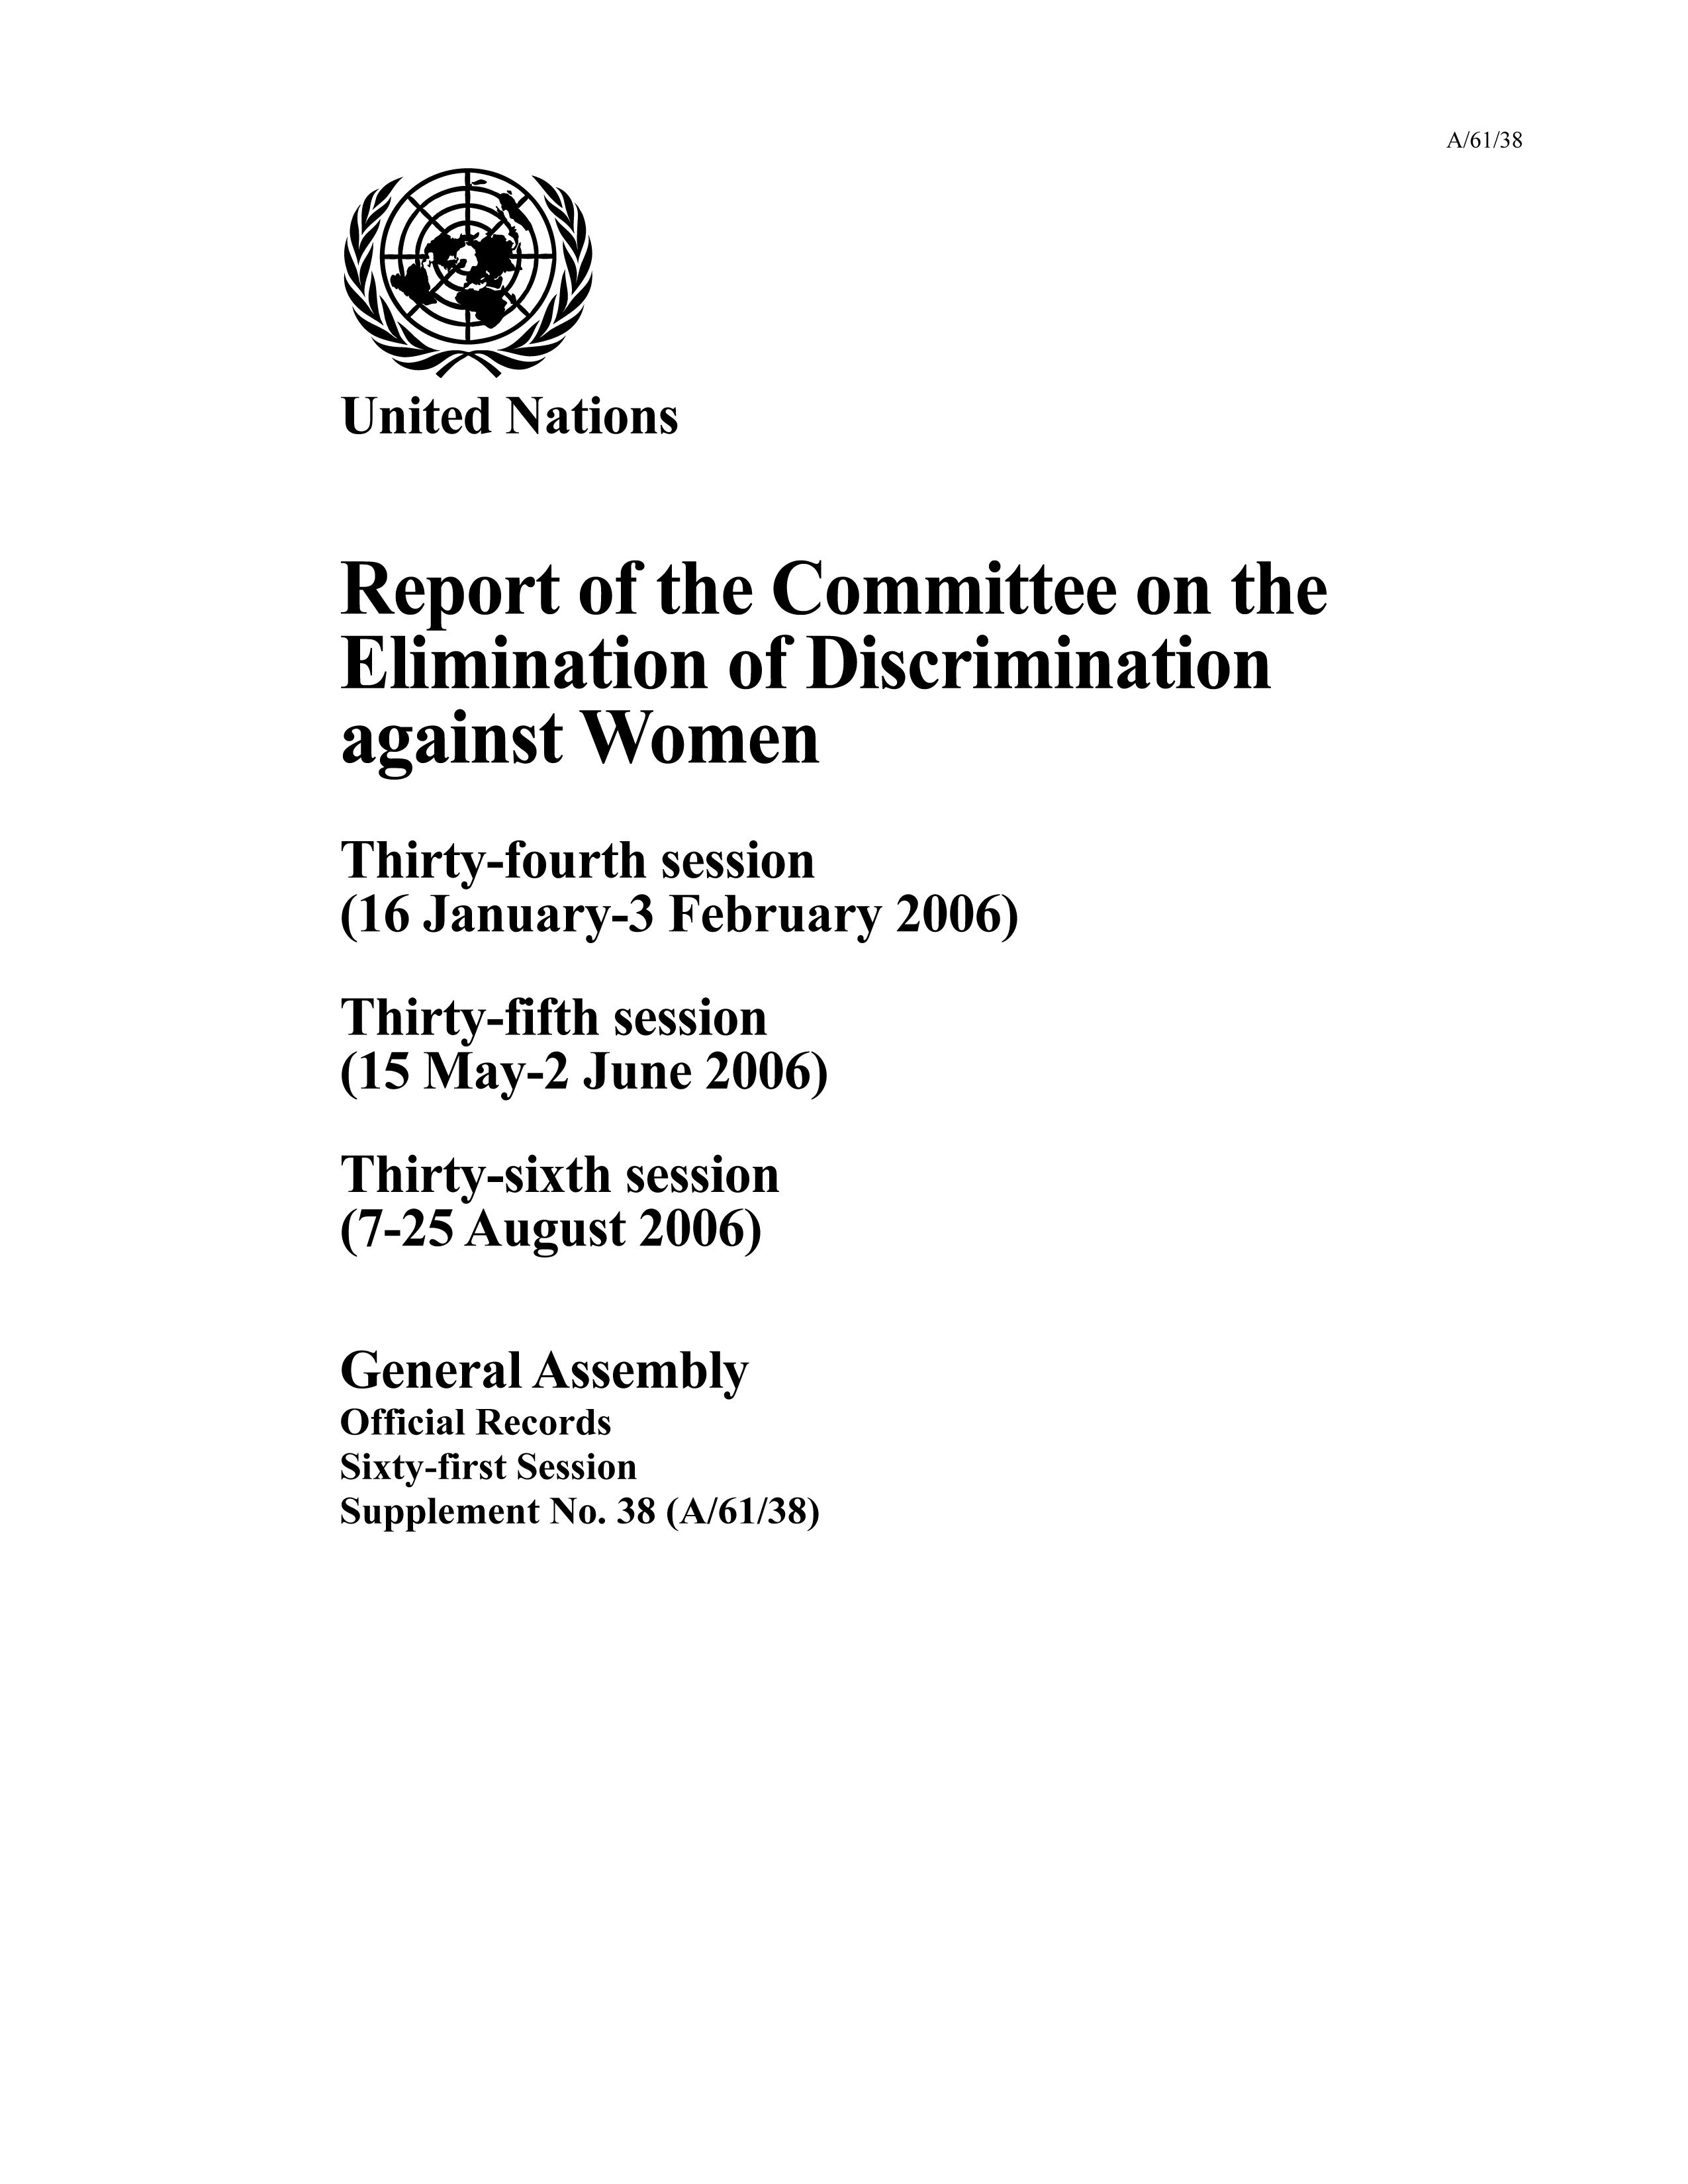 image of States parties to the Convention on the Elimination of All Forms of Discrimination against Women, as at 31 August 2006